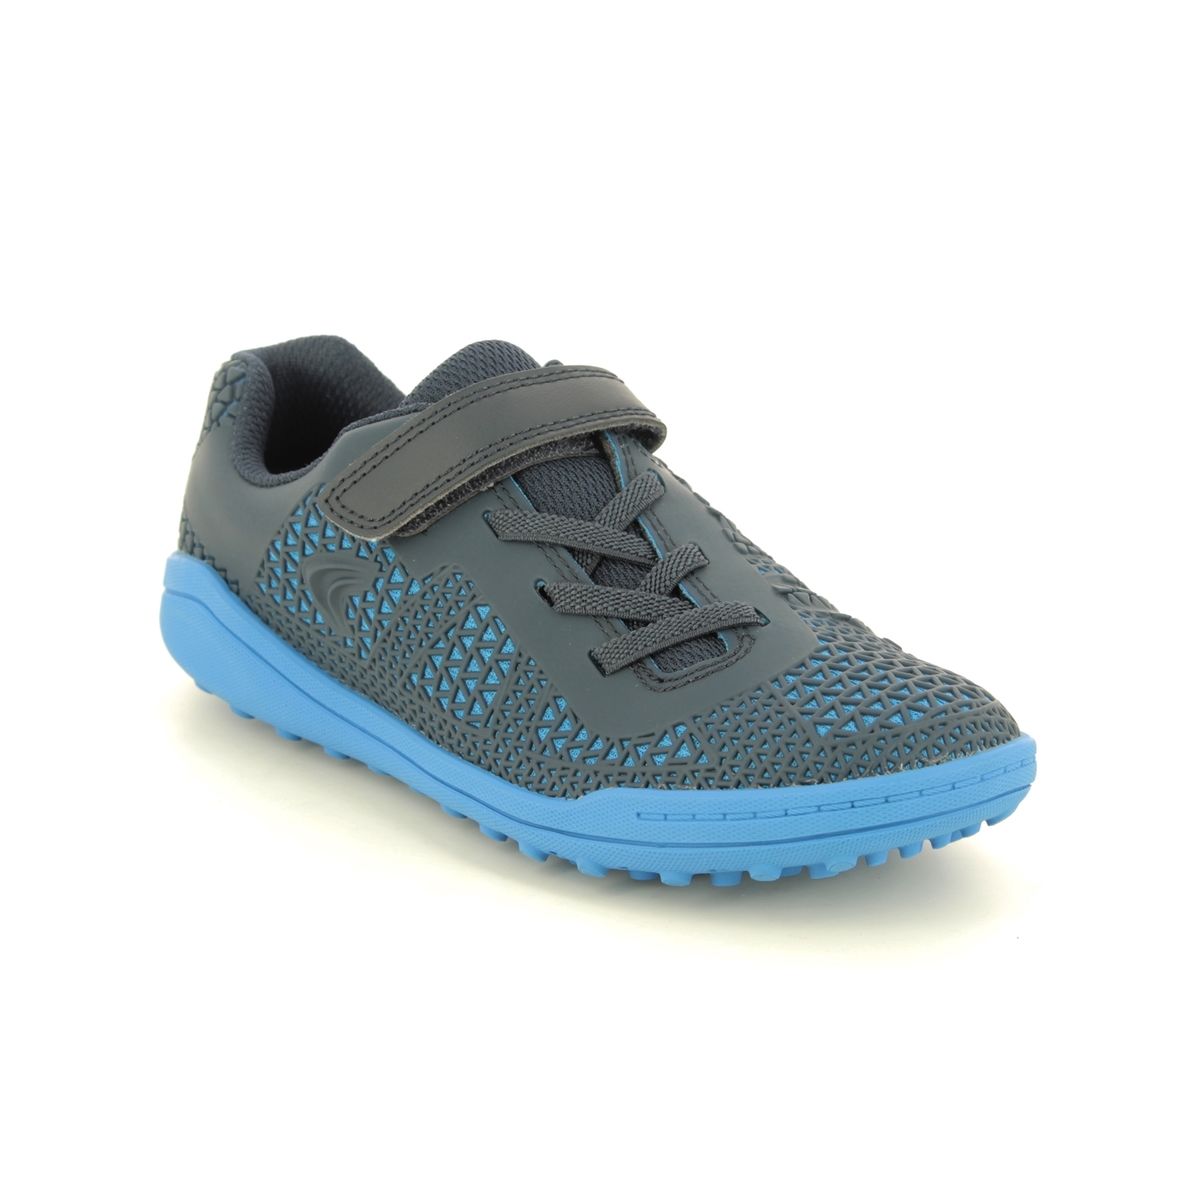 Clarks Award Swift K Navy Kids Boys Trainers 5390-88H in a Plain Man-made in Size 11.5